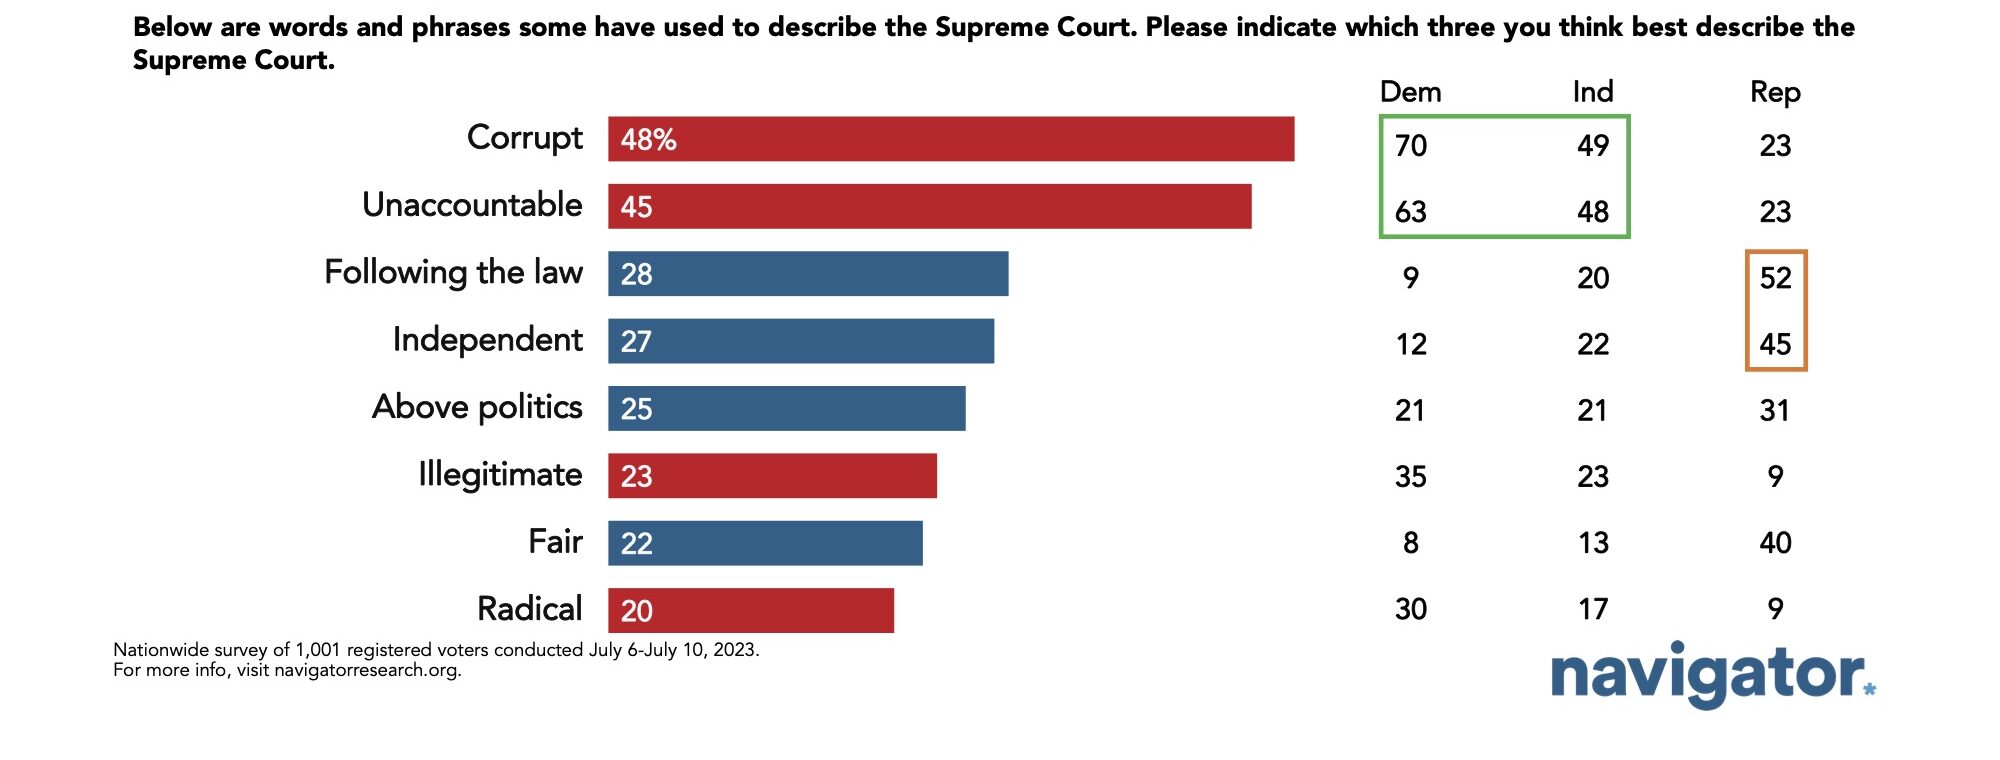 Survey results to the following prompt: Below are words and phrases some have used to describe the Supreme Court. Please indicate which three you think best describe the Supreme Court.